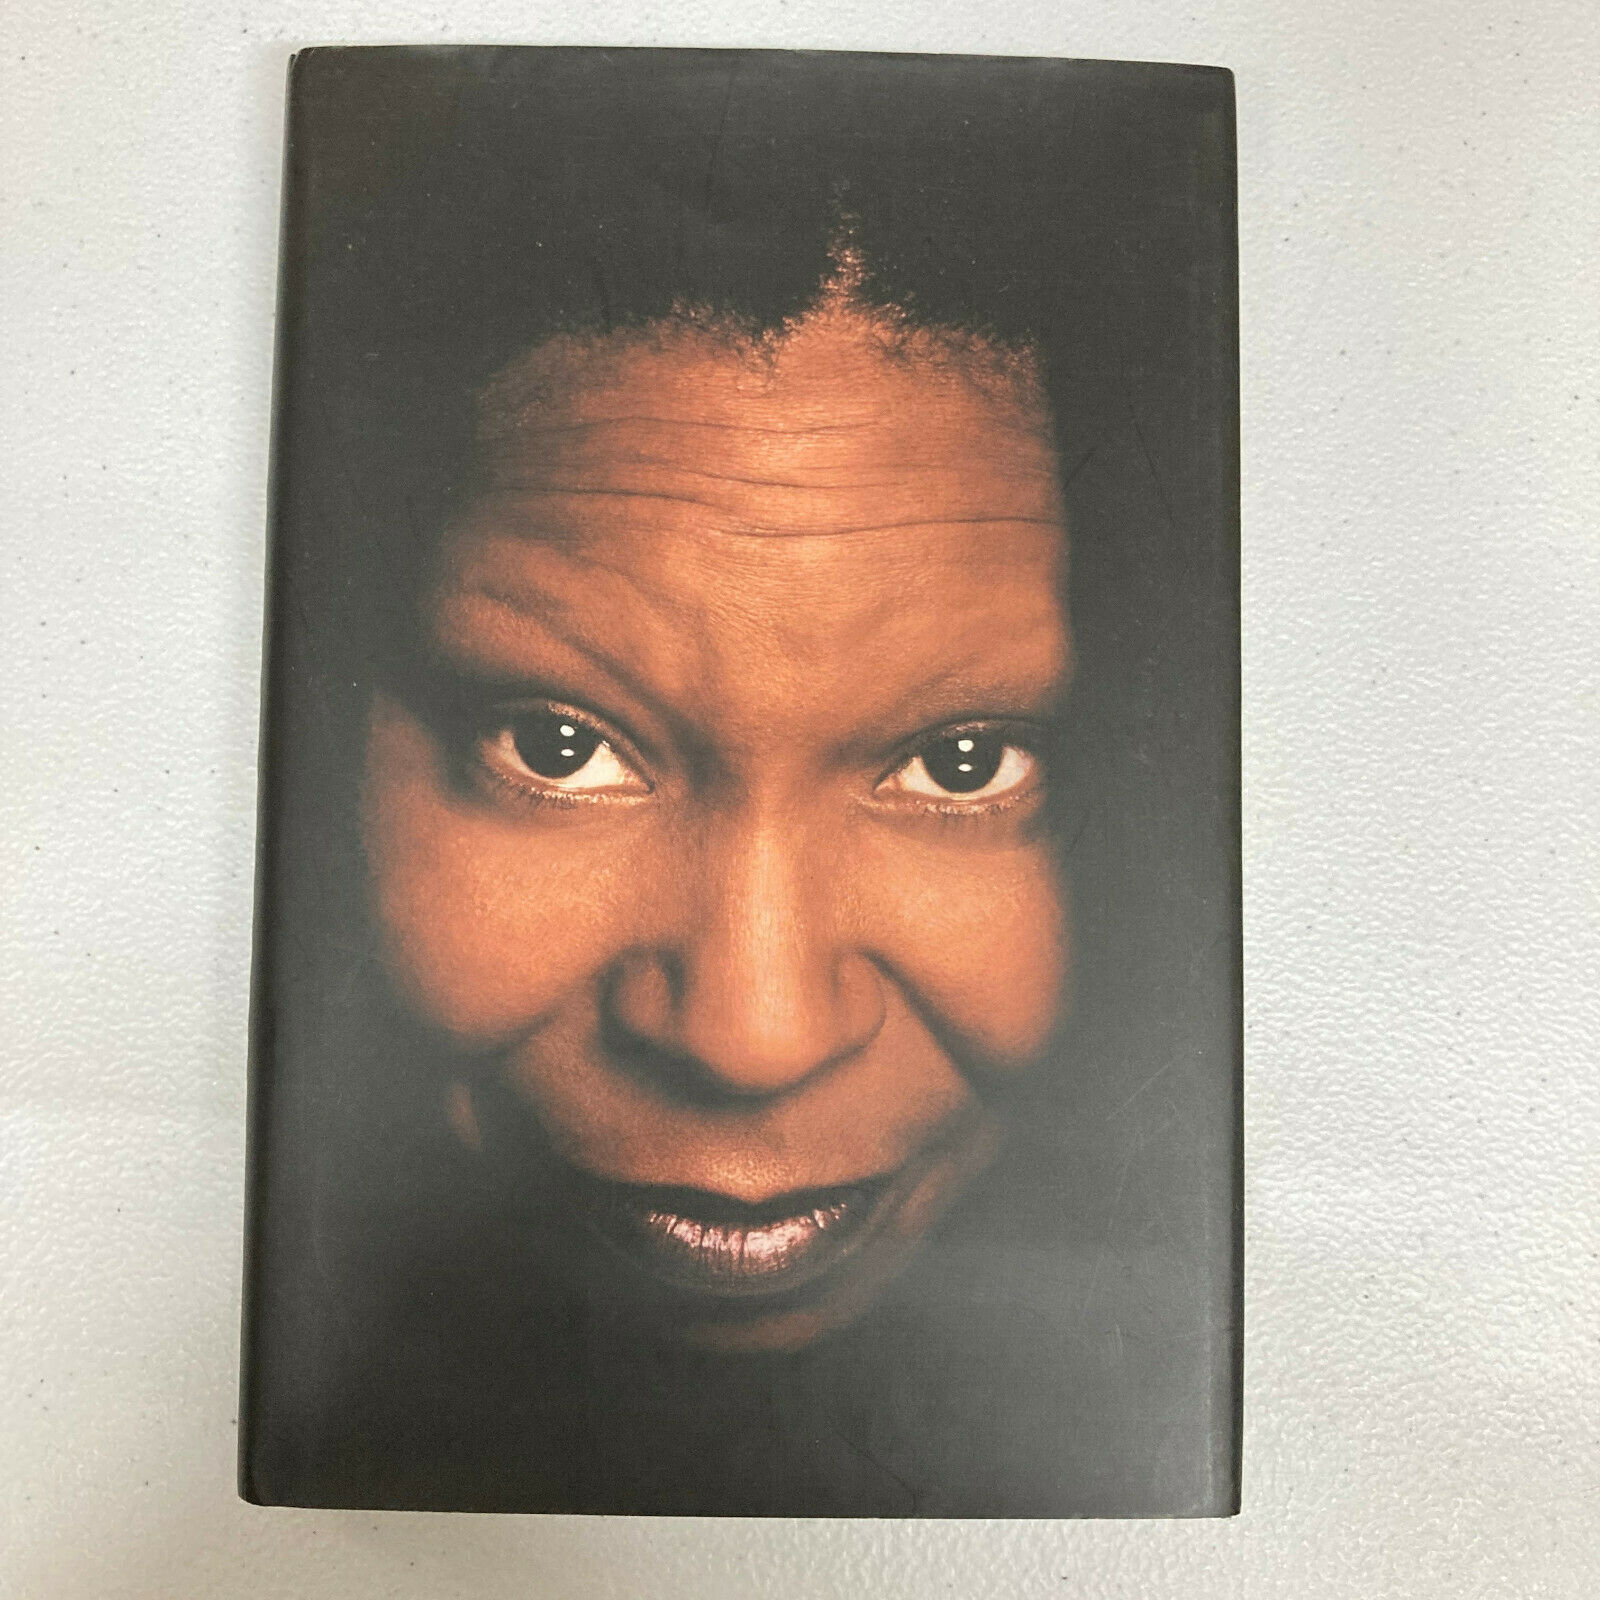 Whoopi Goldberg Book by Whoopi Goldberg Hardcover Book First Edition